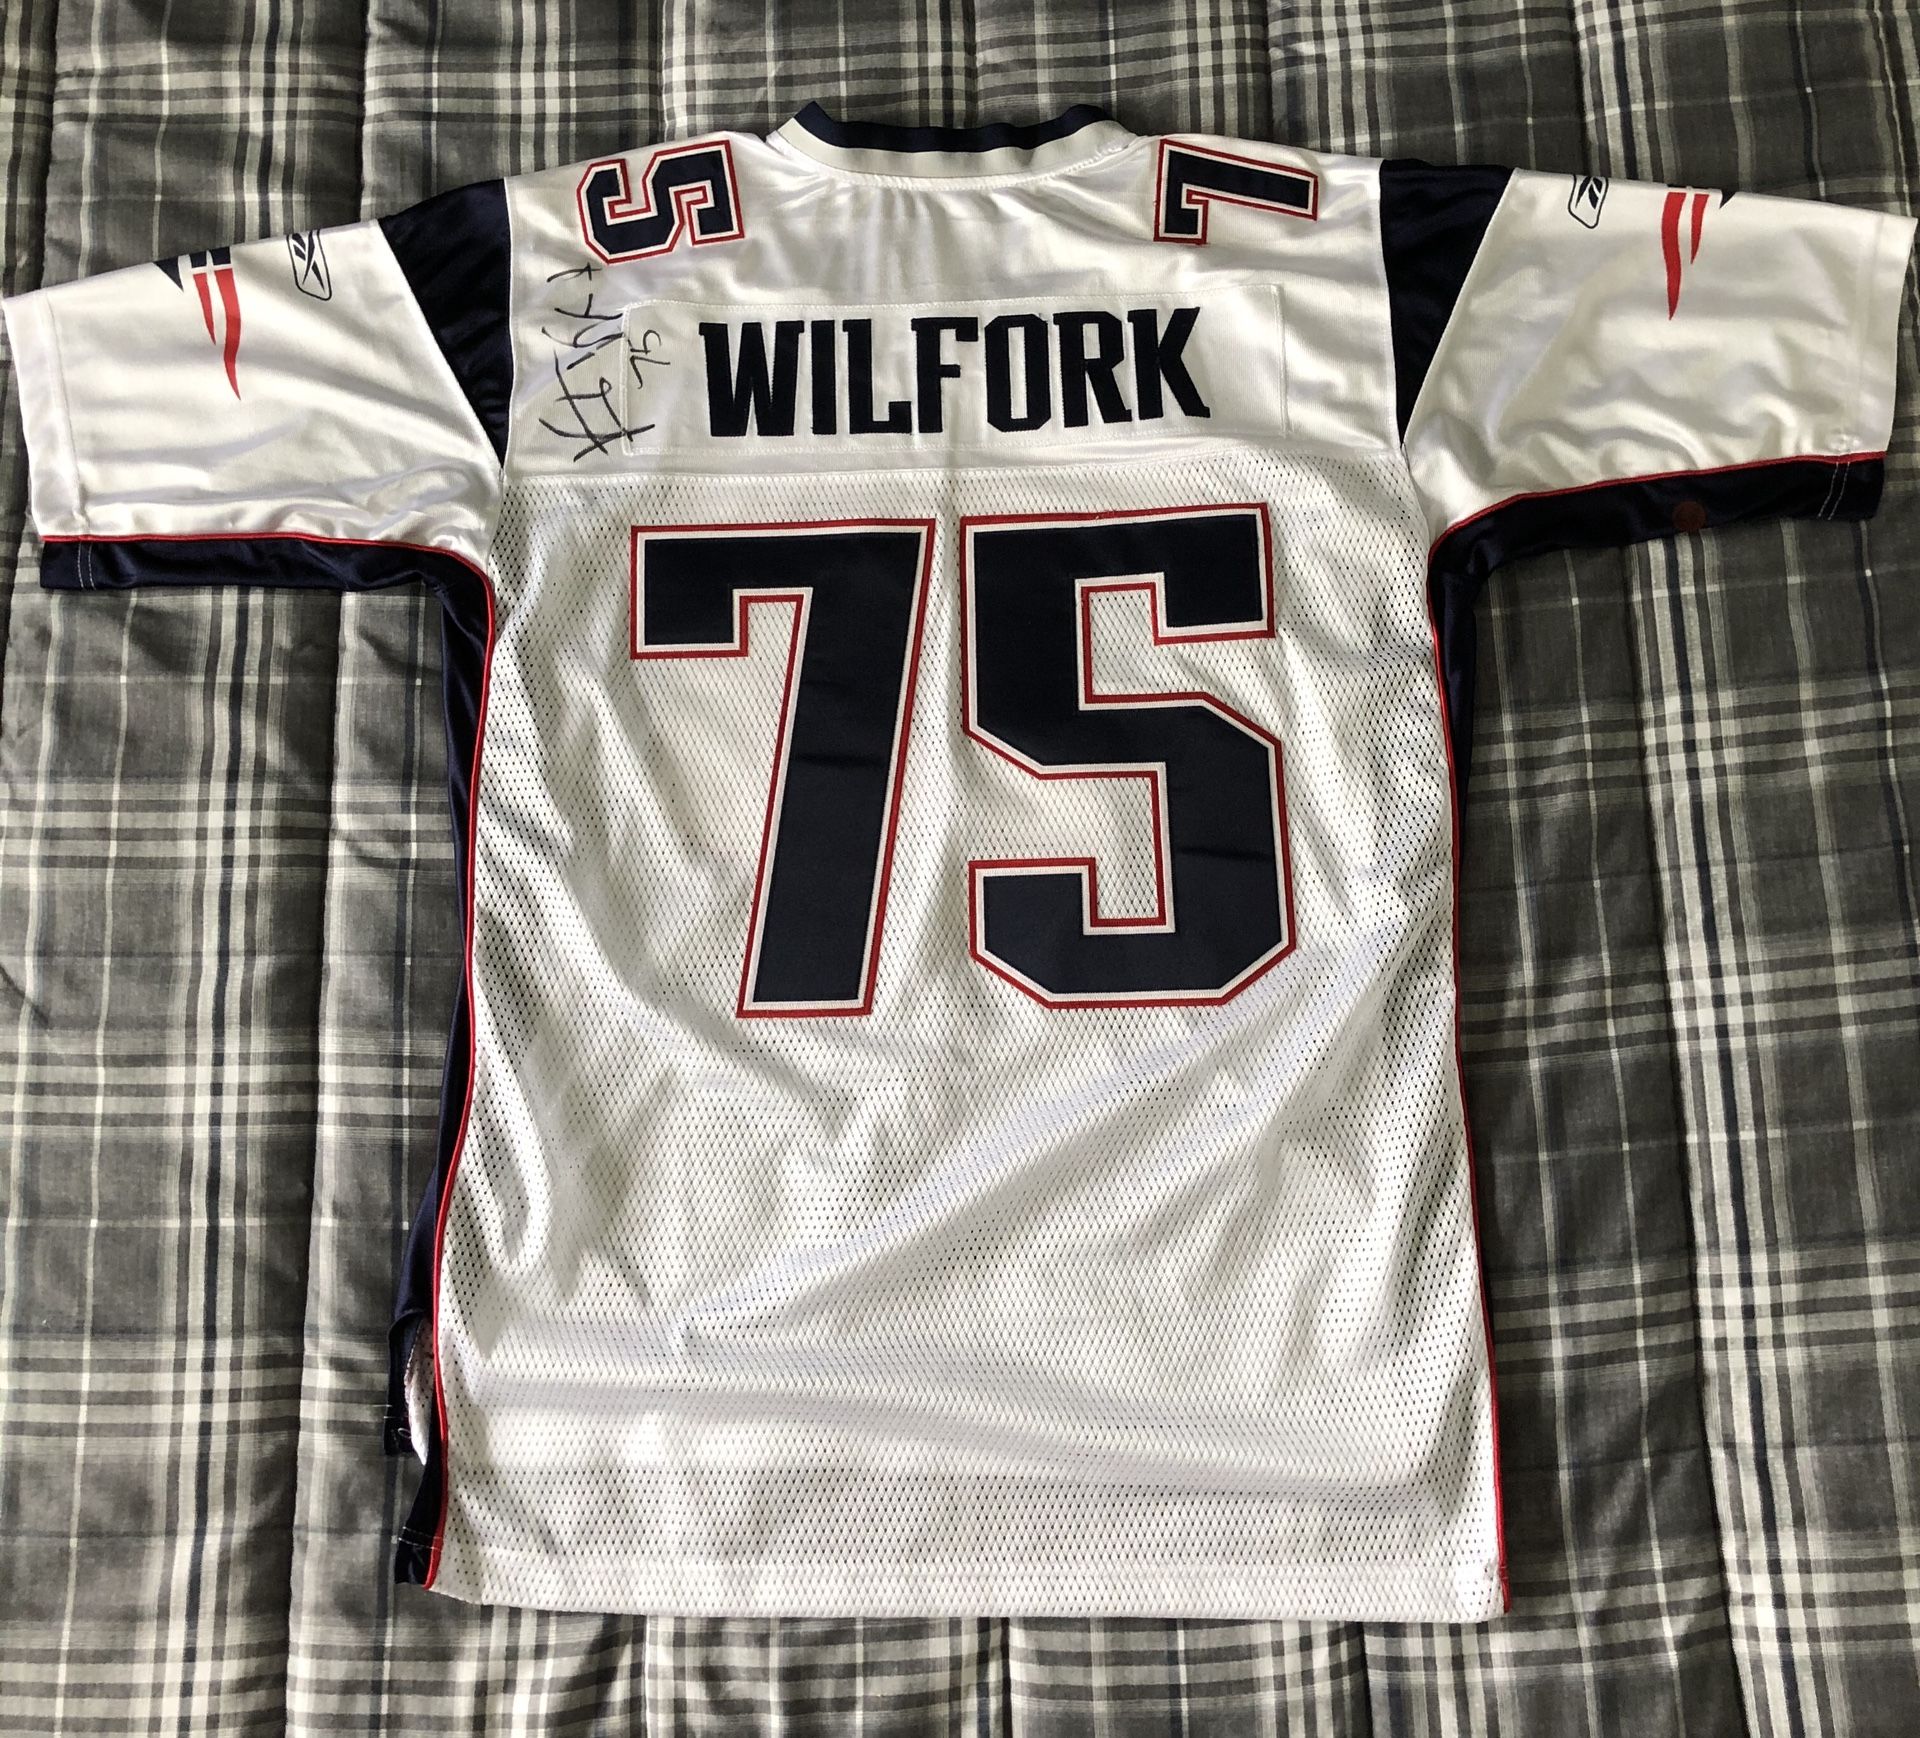 Vince Wilfork signed New England Patriots Jersey and 2 signed photos